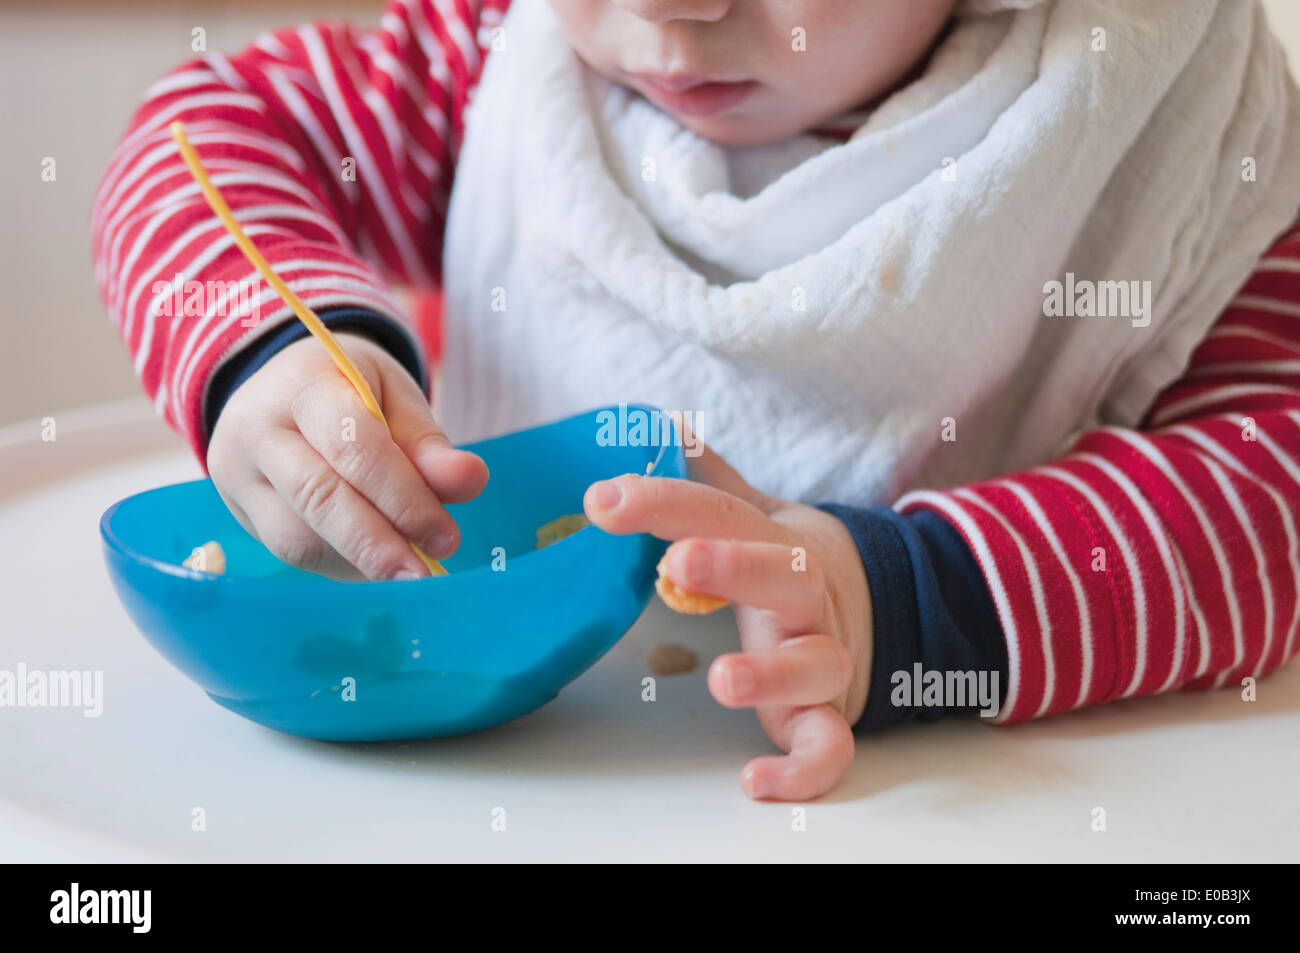 Germany, Baby boy eating from plastic bowl Stock Photo